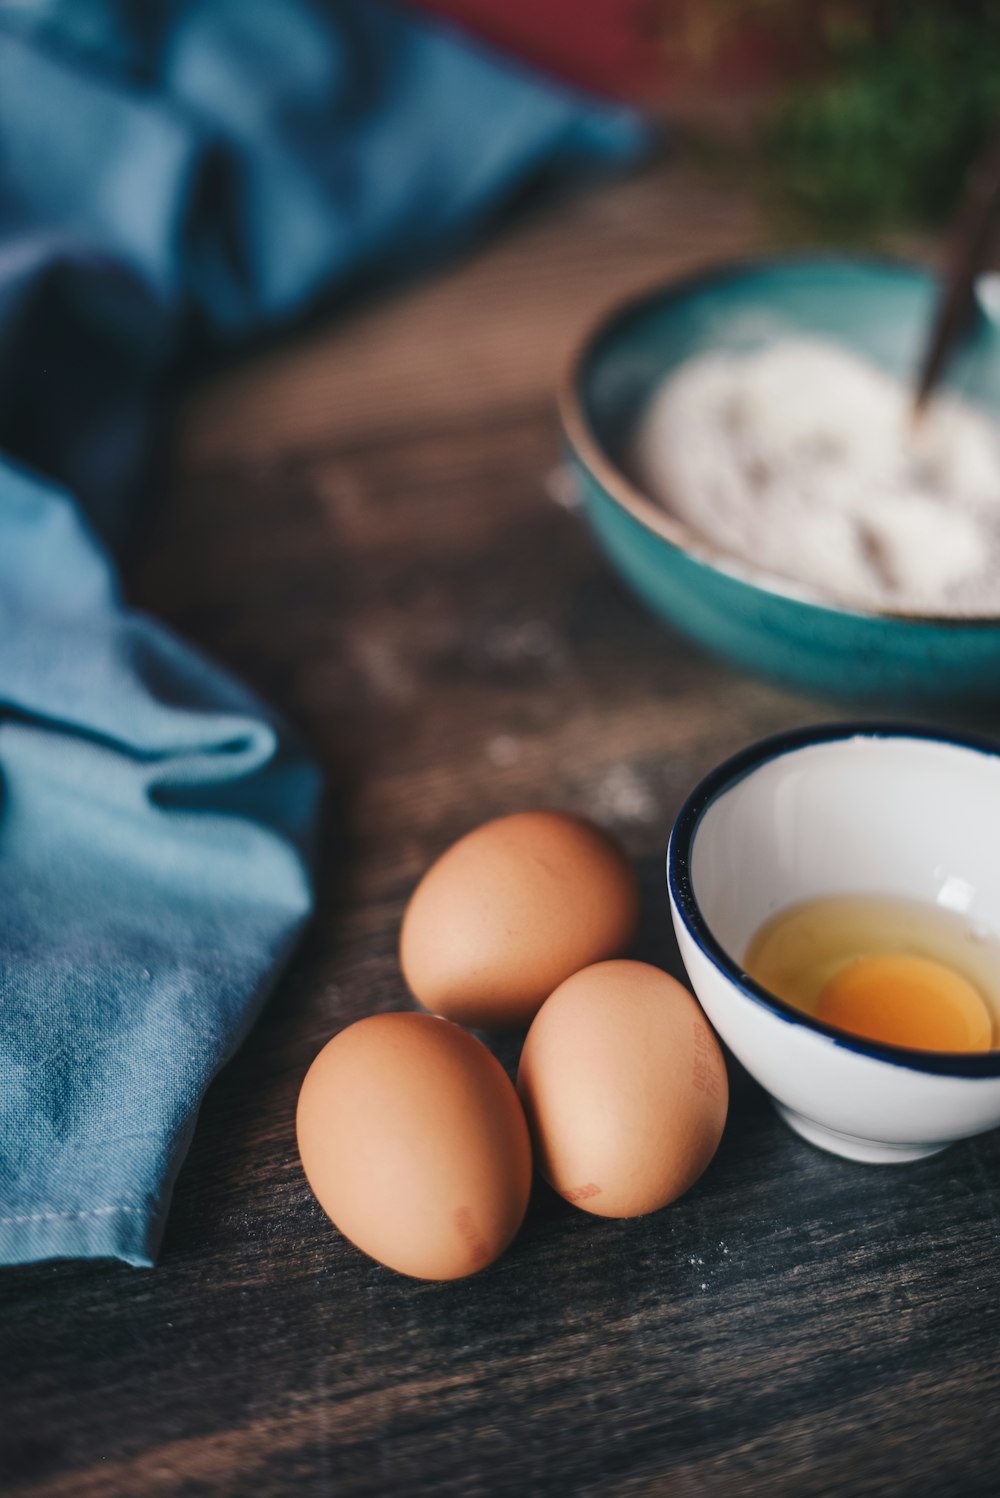 selective focus photography of three brown eggs near white ceramic bowl